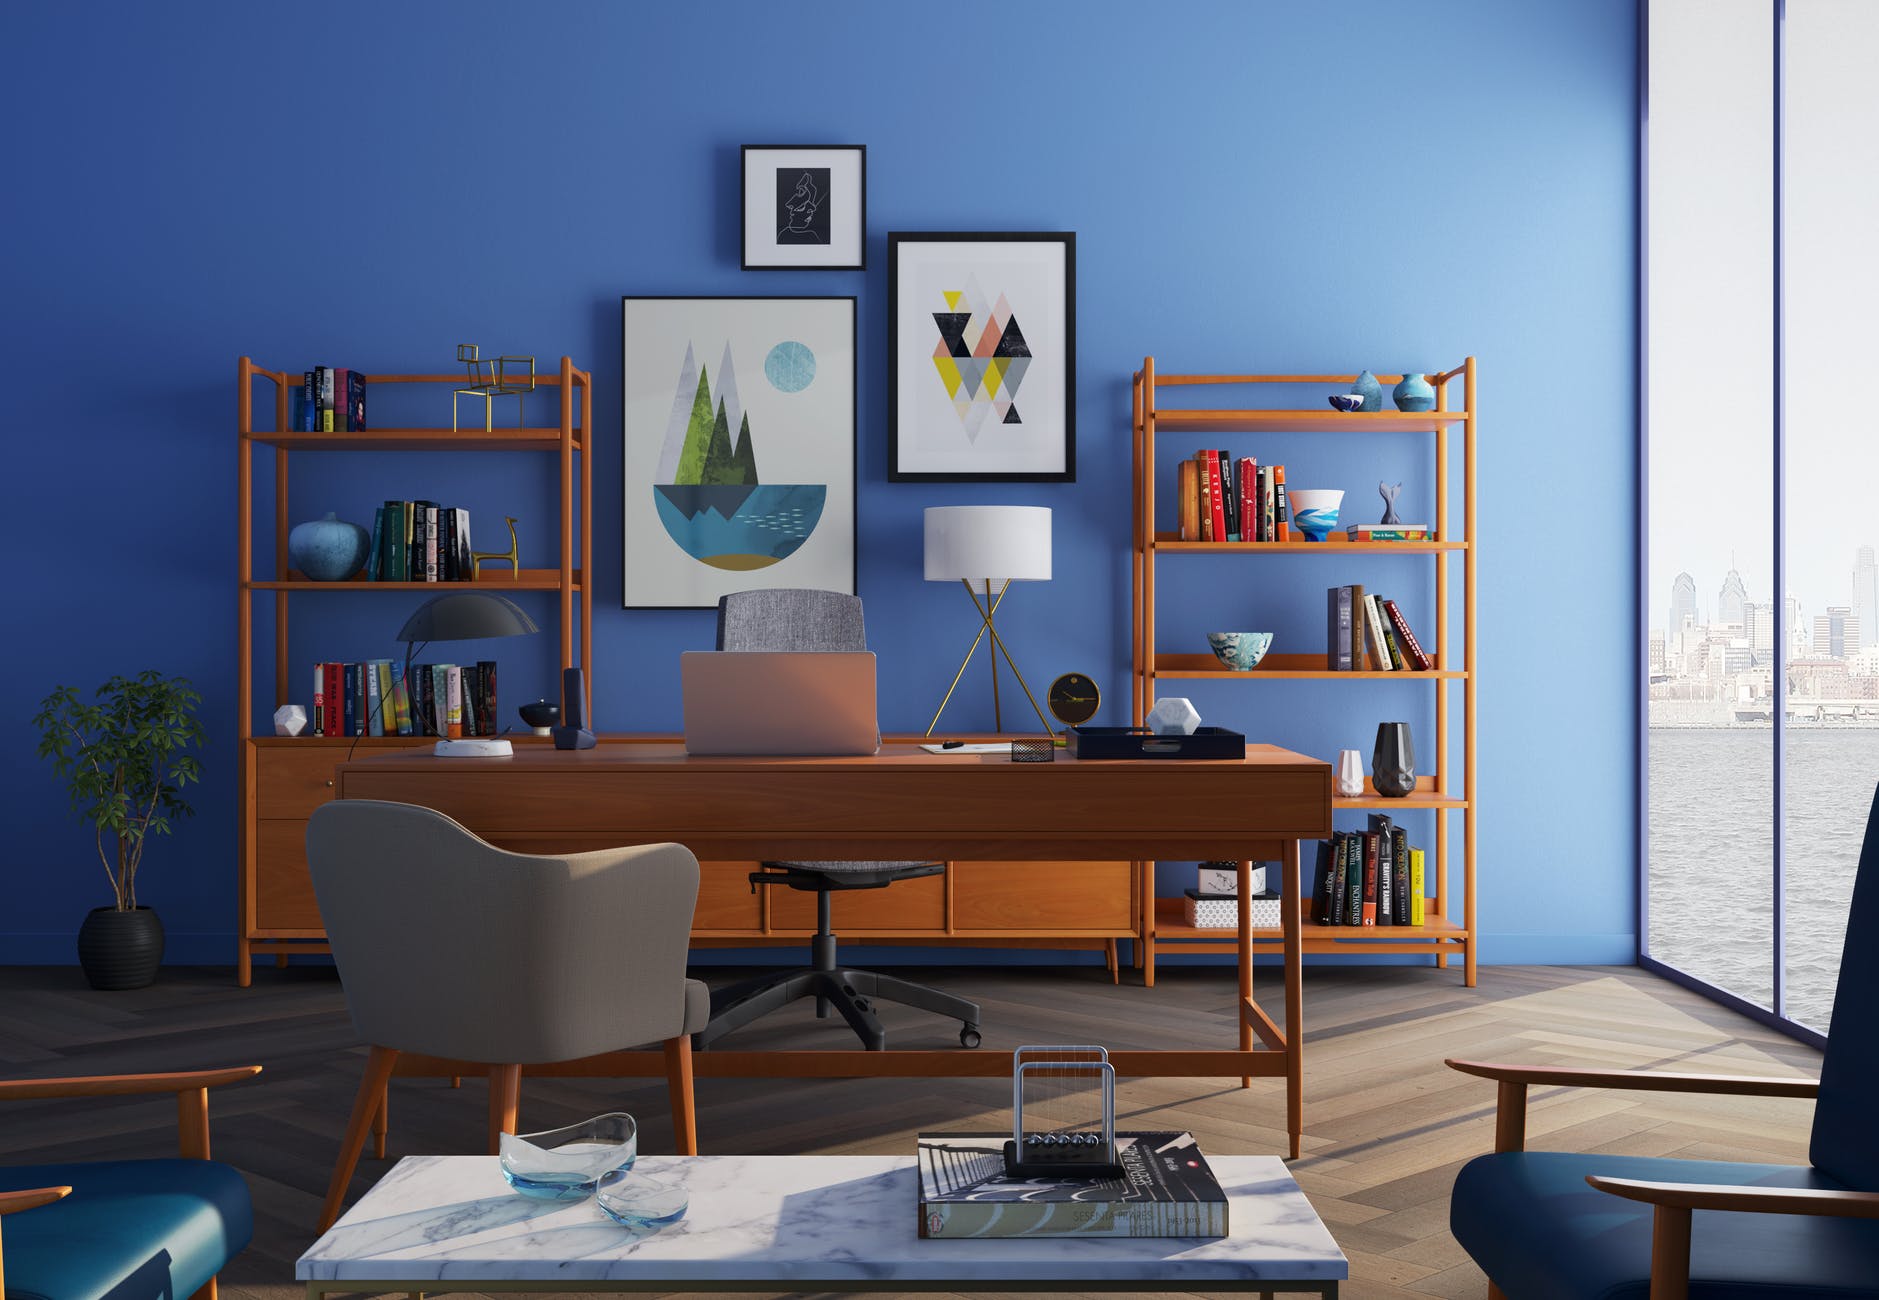 6 Must-Have Accessories for Your Study Room